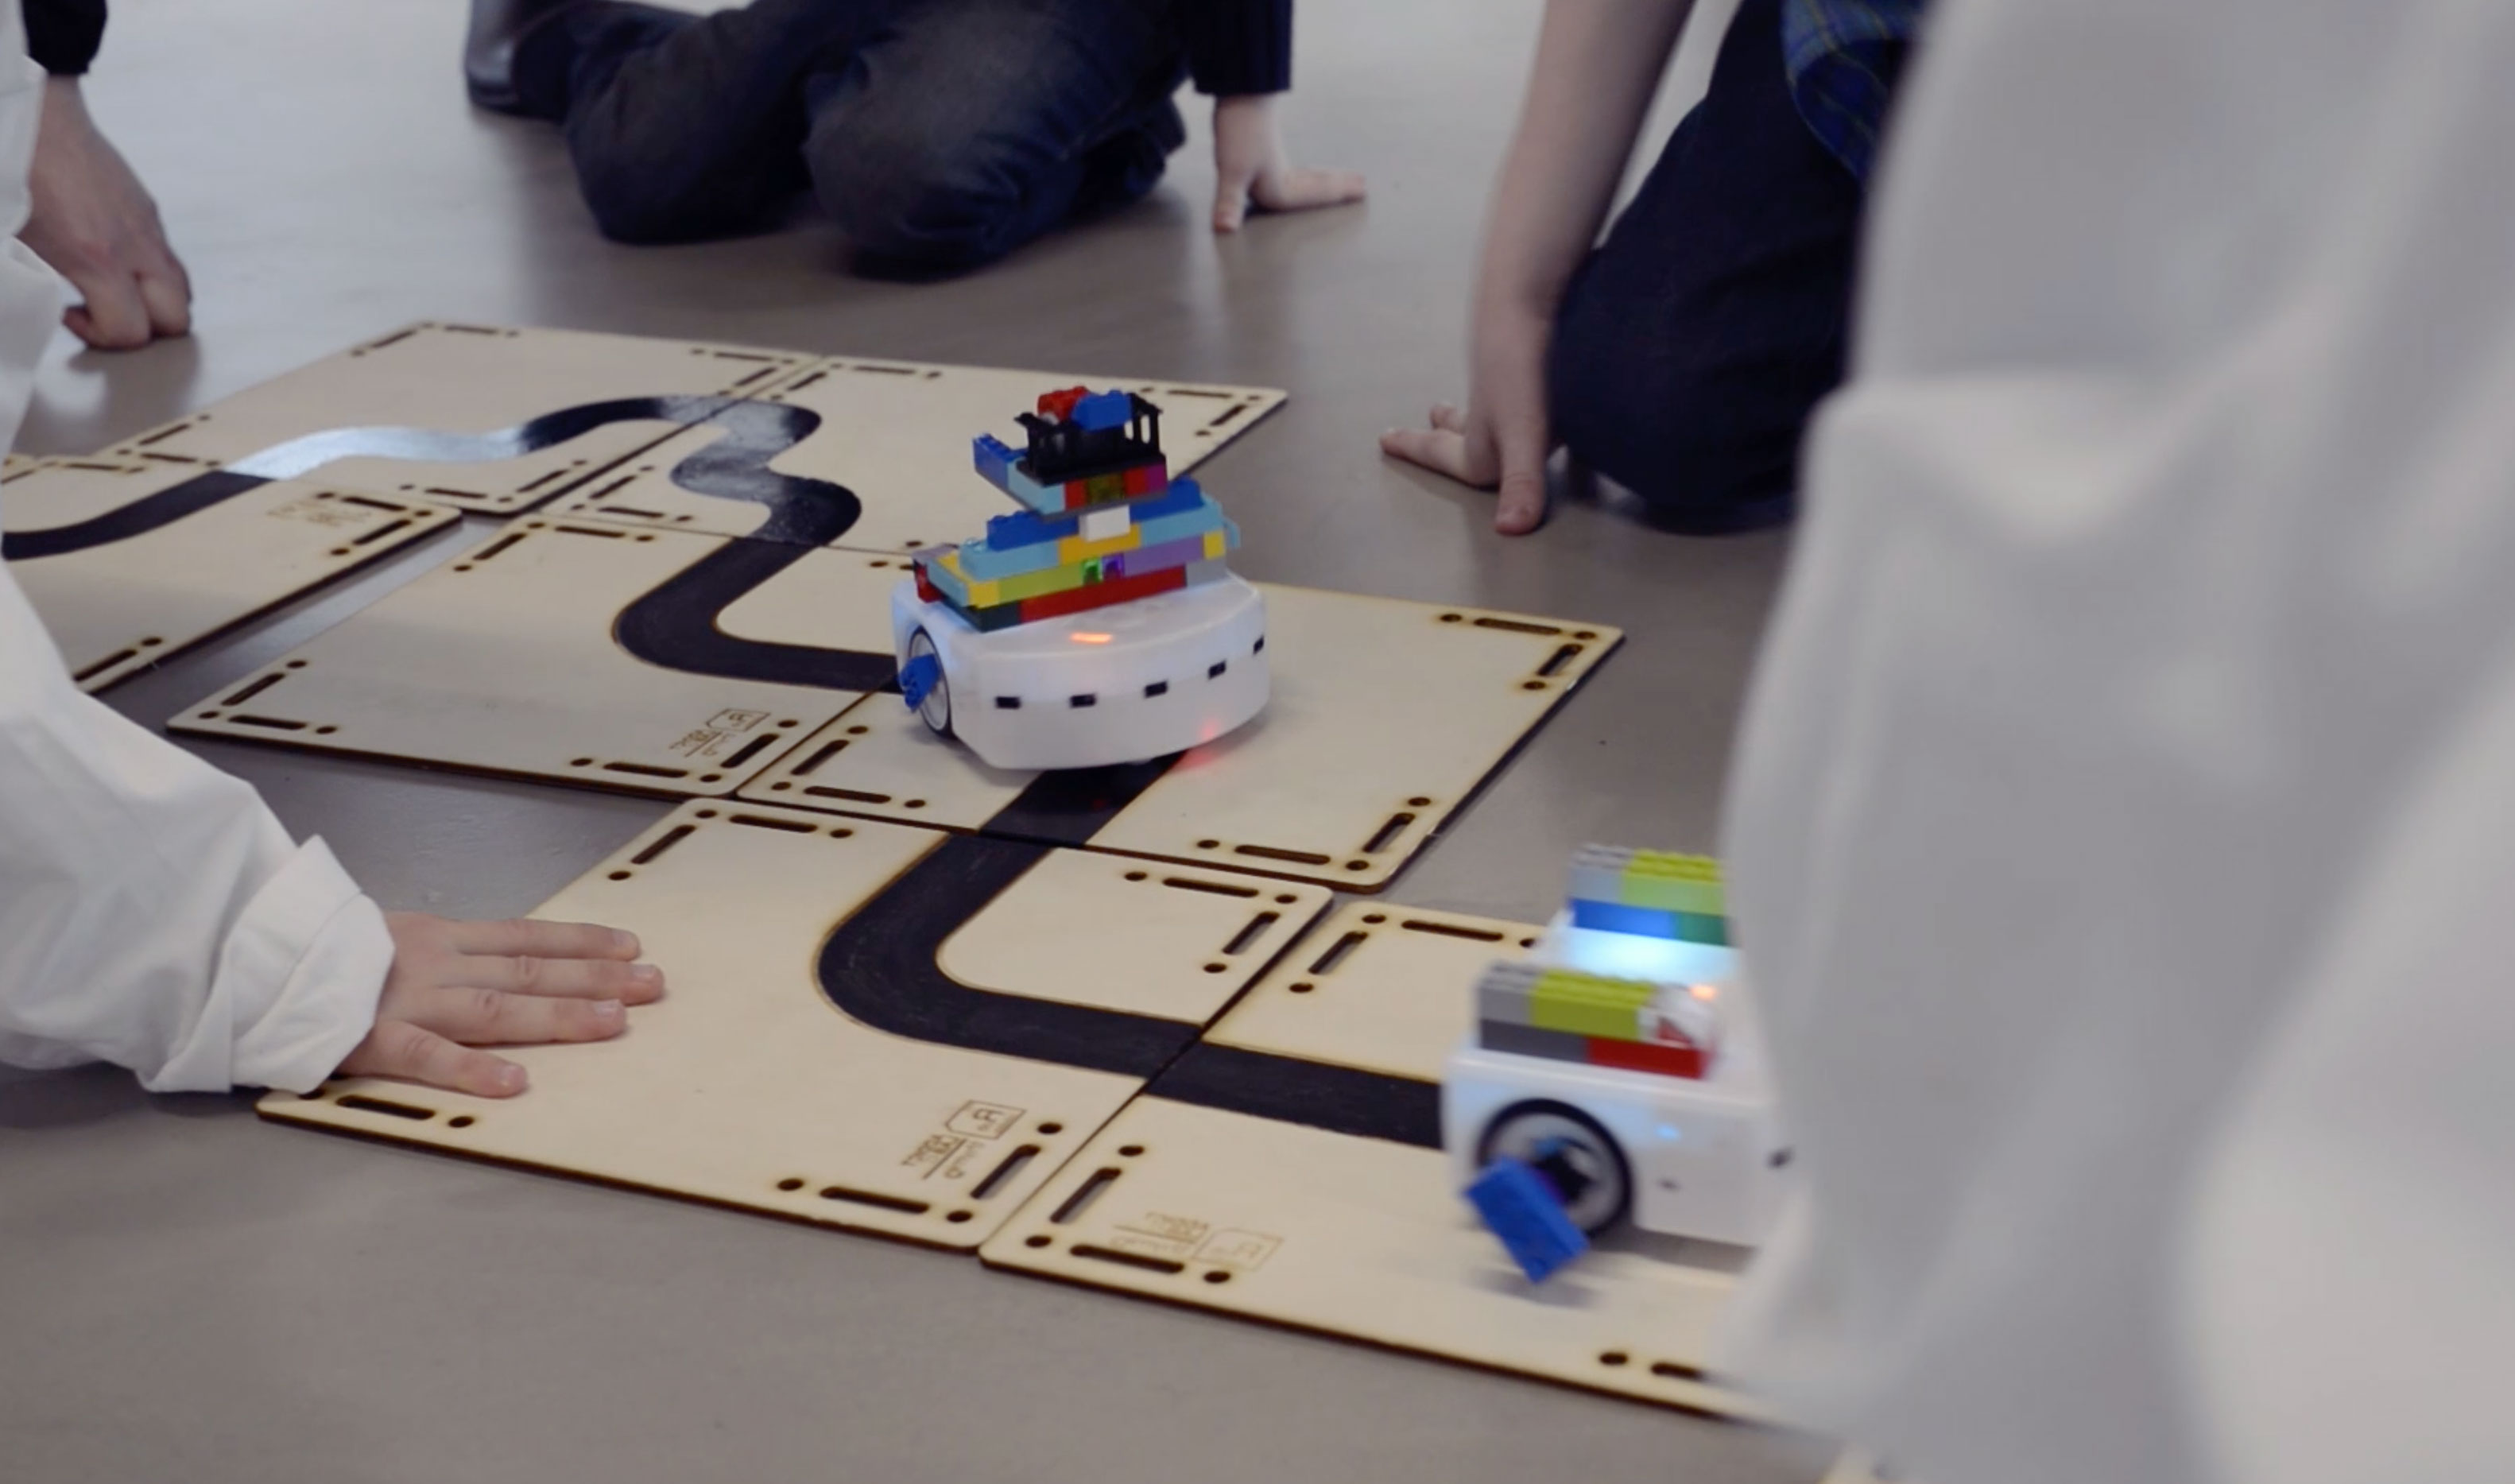 Kids playing with Epfl's Thymio robots on laser cut wooden tracks made by Addictlab Academy during a birthday party